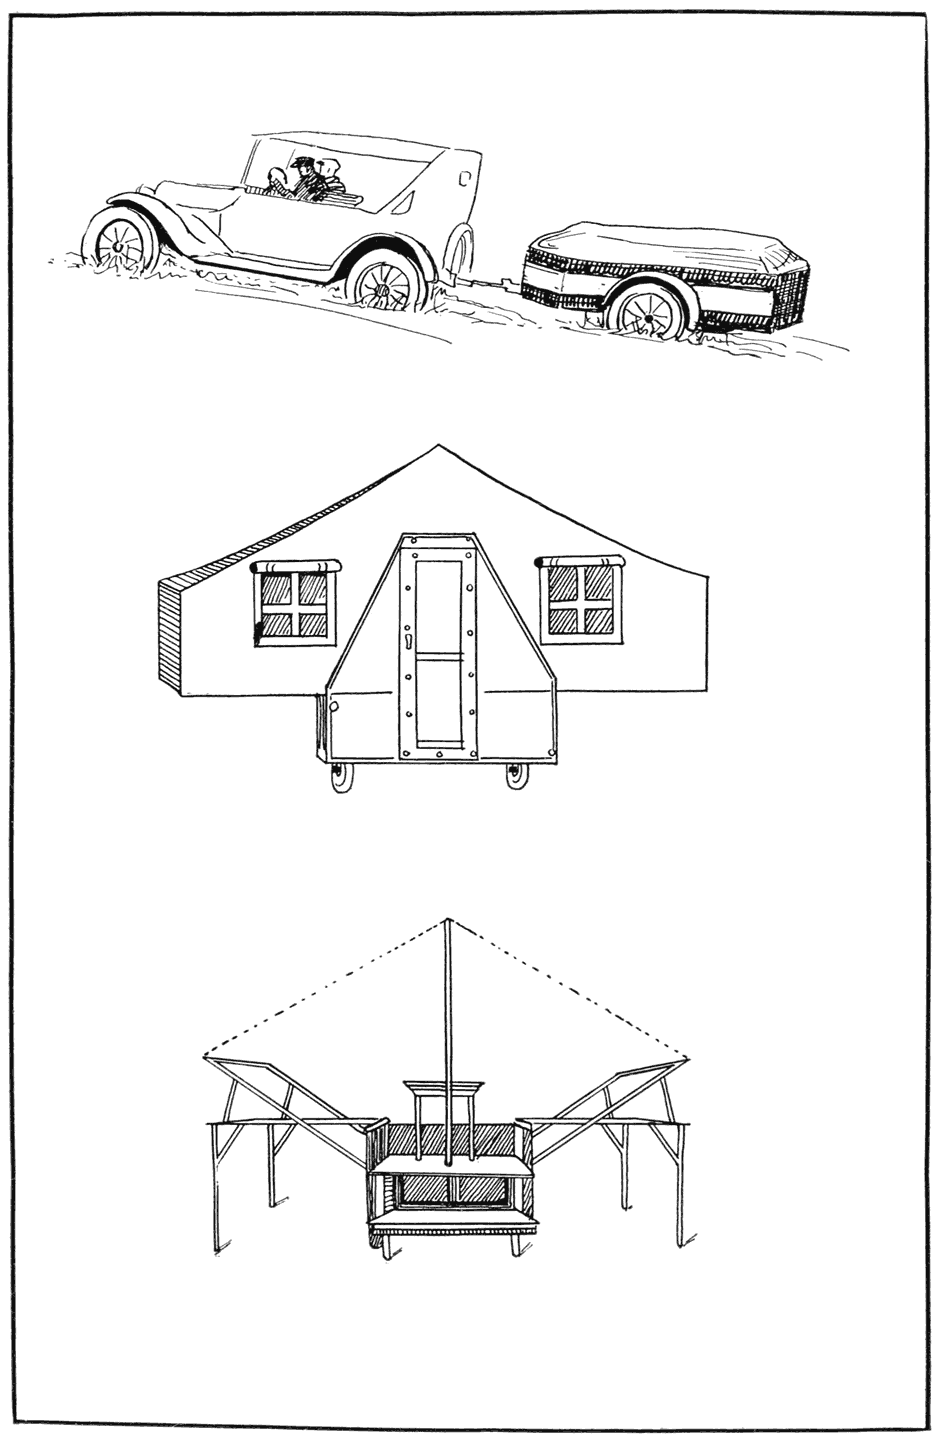 Three trailers. At the top is the Motorbungalow Jr. packed for
the journey. In the middle is the Chenango with sides let down,
giving a bungalow effect. The lowest picture is the Auto-Kamp,
showing the framework ready for the tent top. The framework
folds into a small space when the trailer is on tour.